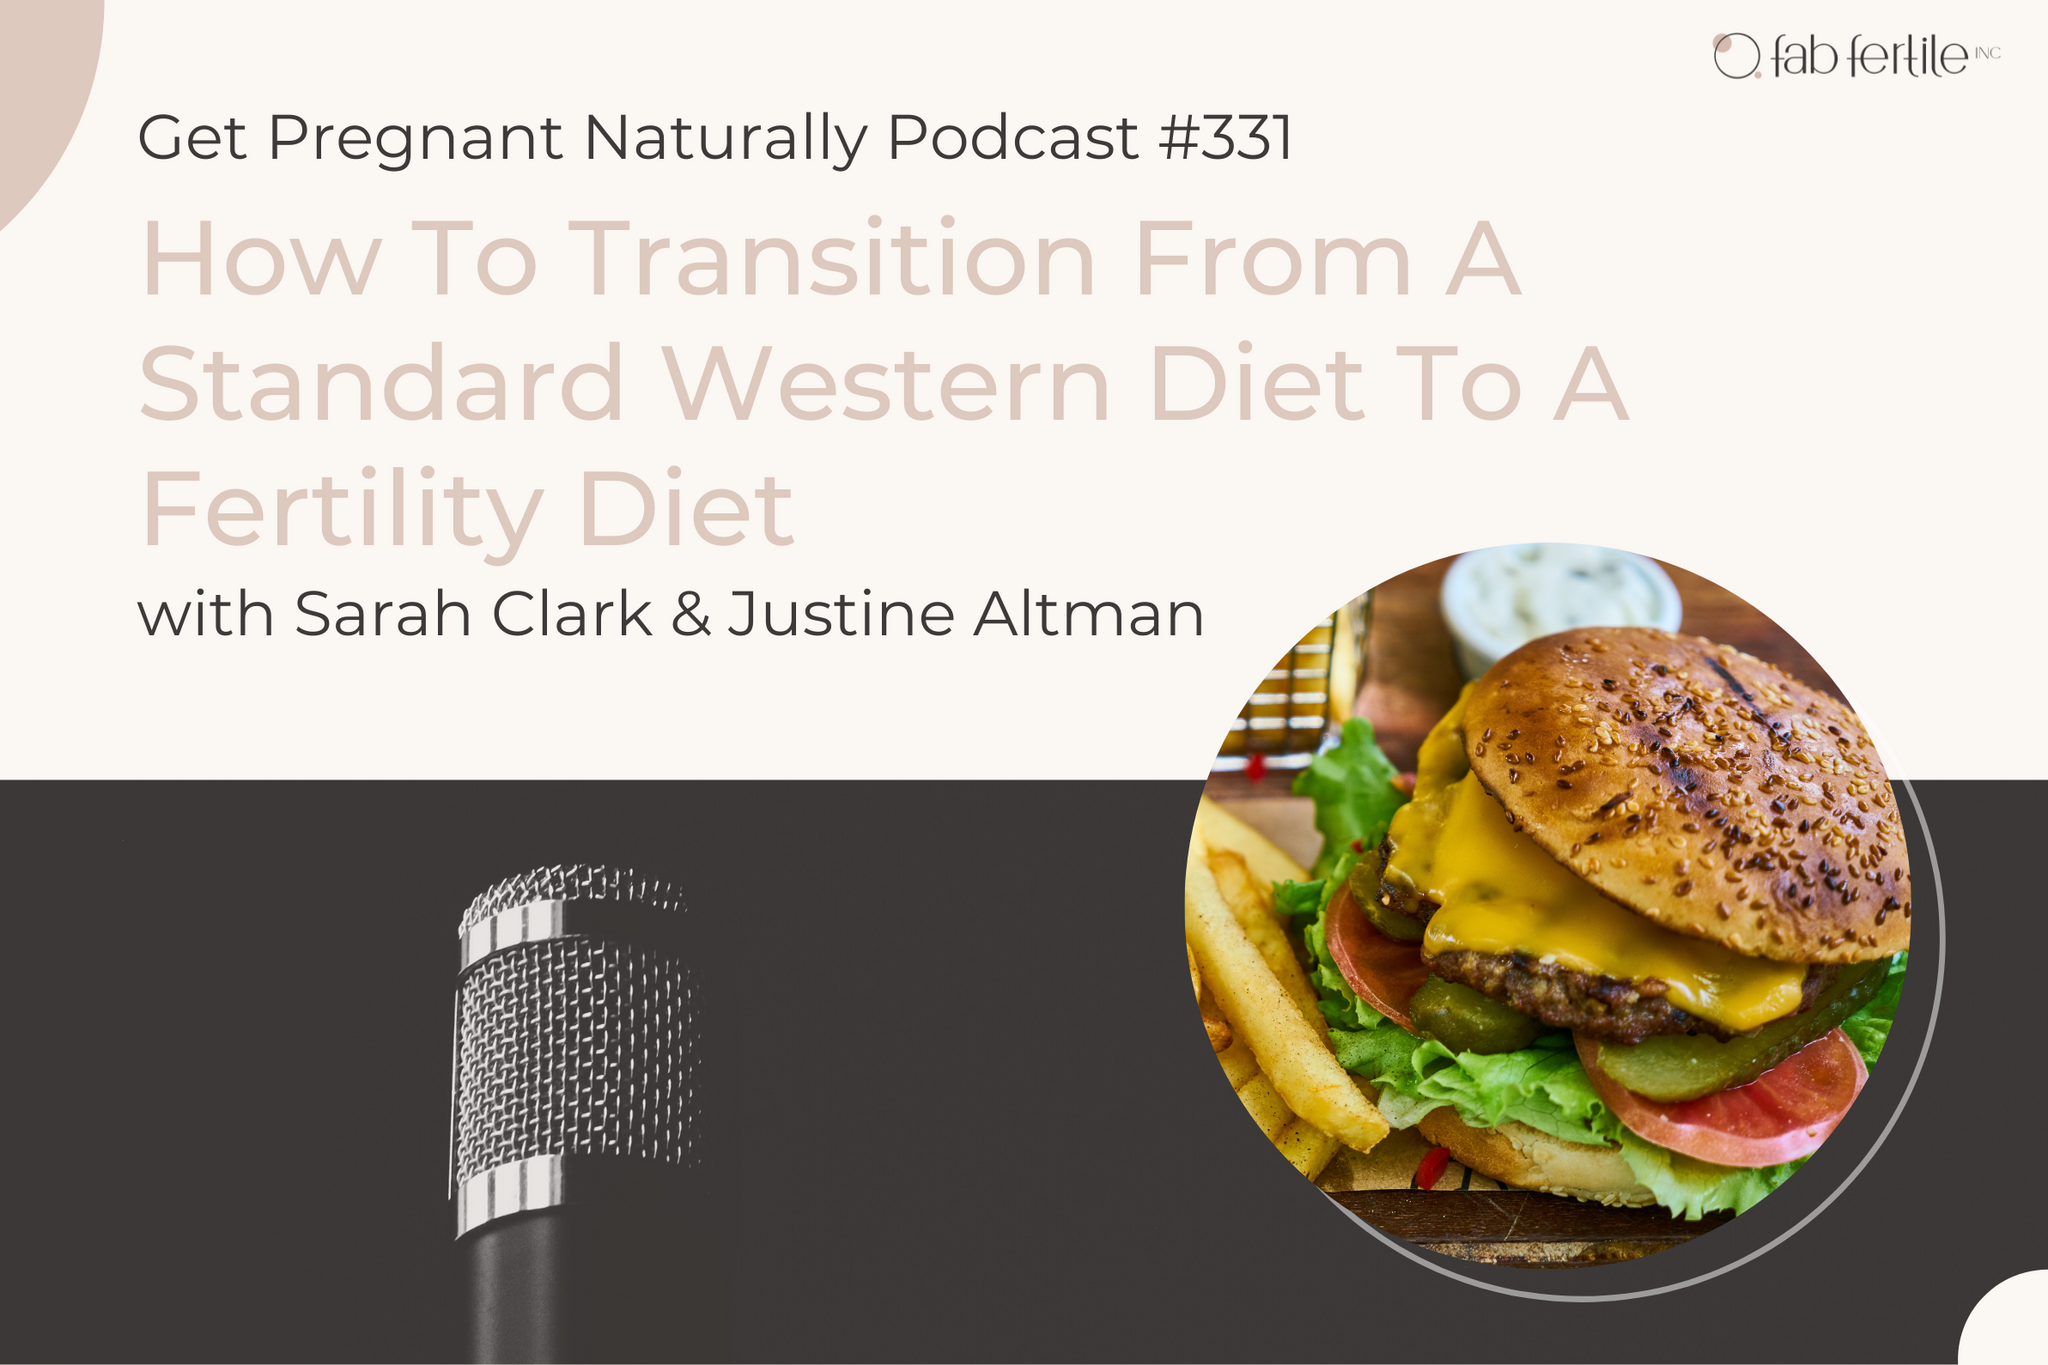 How To Transition From A Standard Western Diet To A Fertility Diet